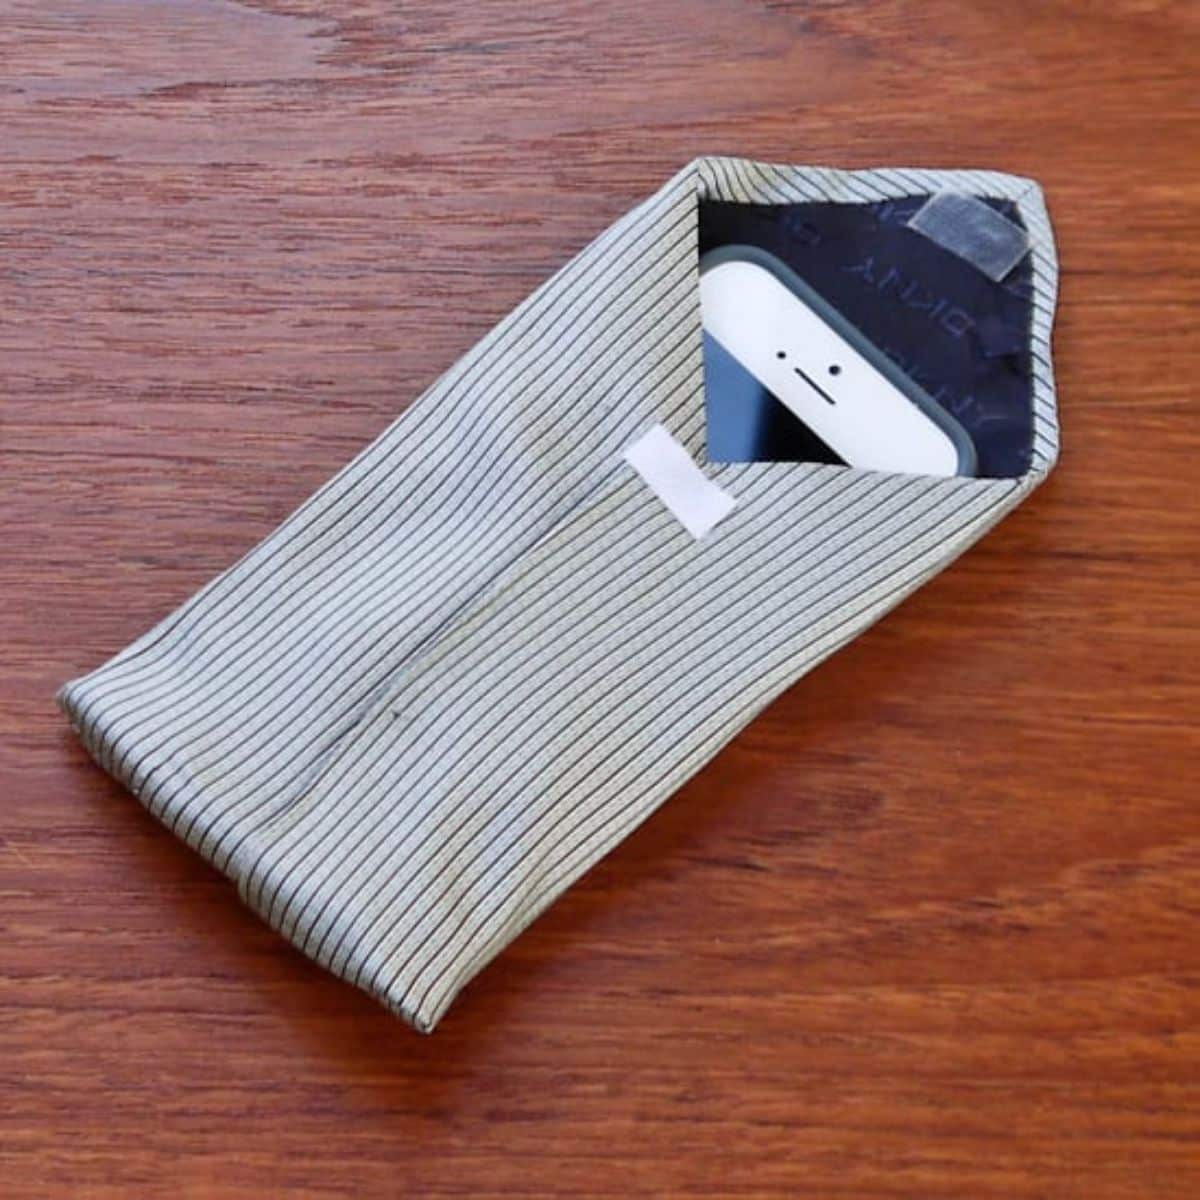 Upcycle a Tie Into a Phone Case